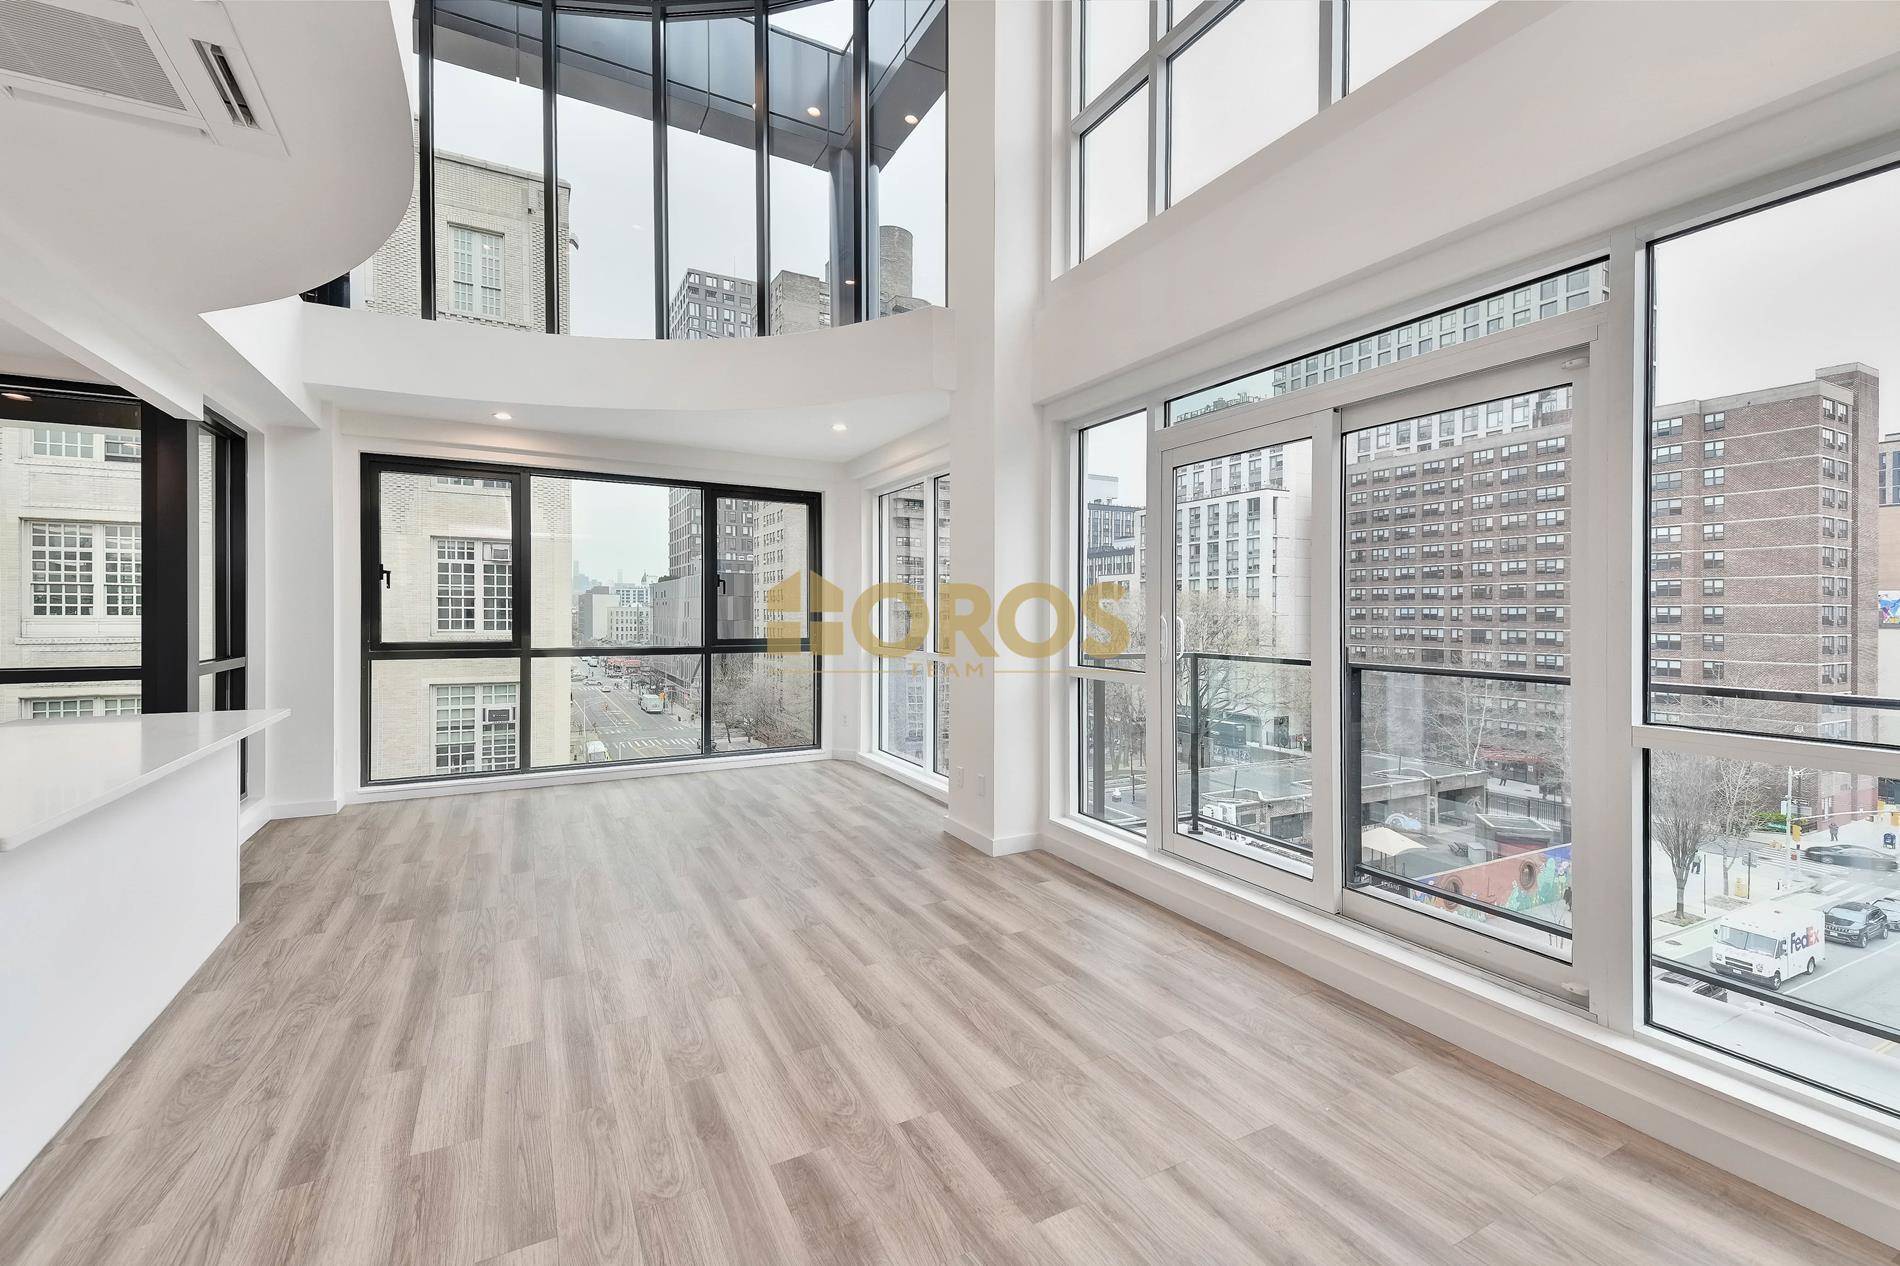 Welcome to the brand new development corner building at 355 Grand St offering 2 unique Triplex Penthouse and Duplex apartments with private outdoor space with an elevator keycard ride to ...